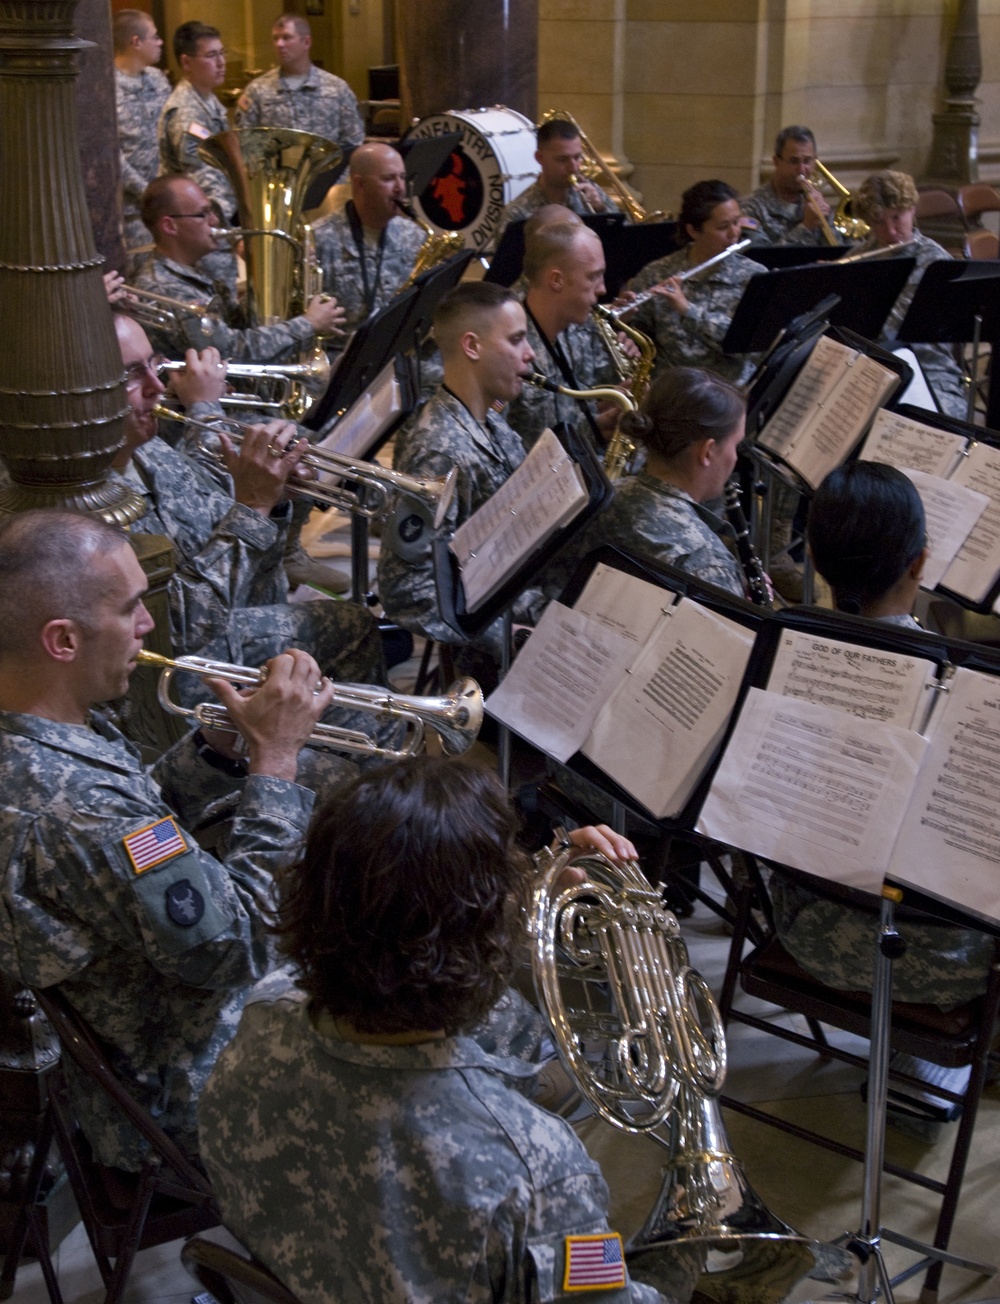 34th Infantry Division Band performs during 2011 Minnesota Festival of Tribute and Honor Opening Ceremony